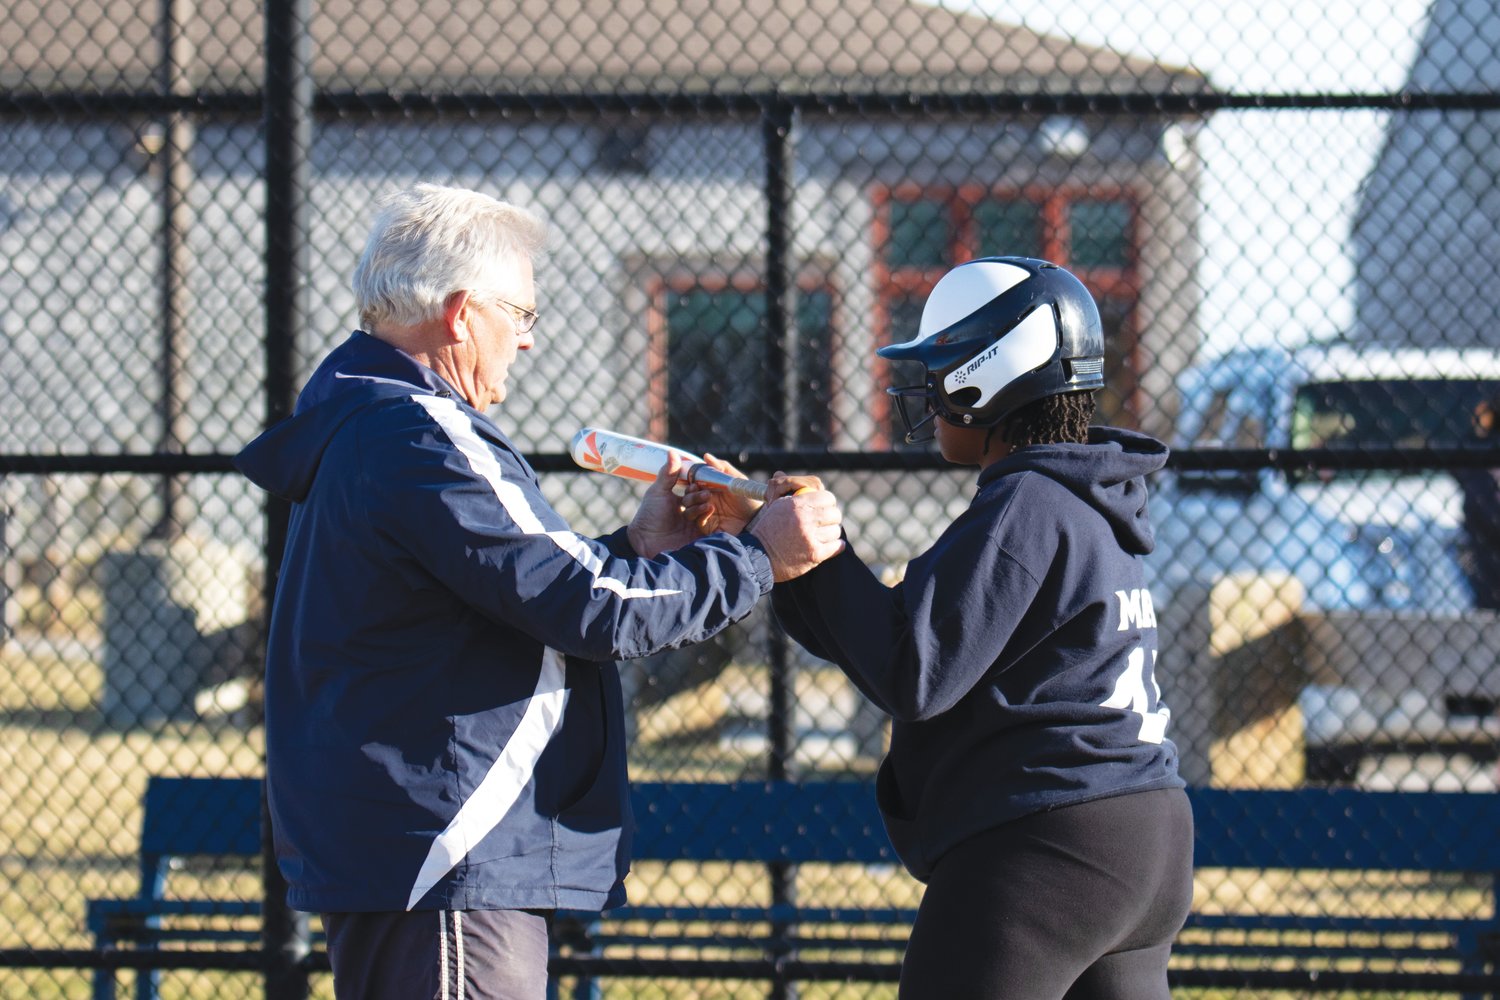 Senior-filled softball team eying return to playoffs - The Inquirer and Mirror